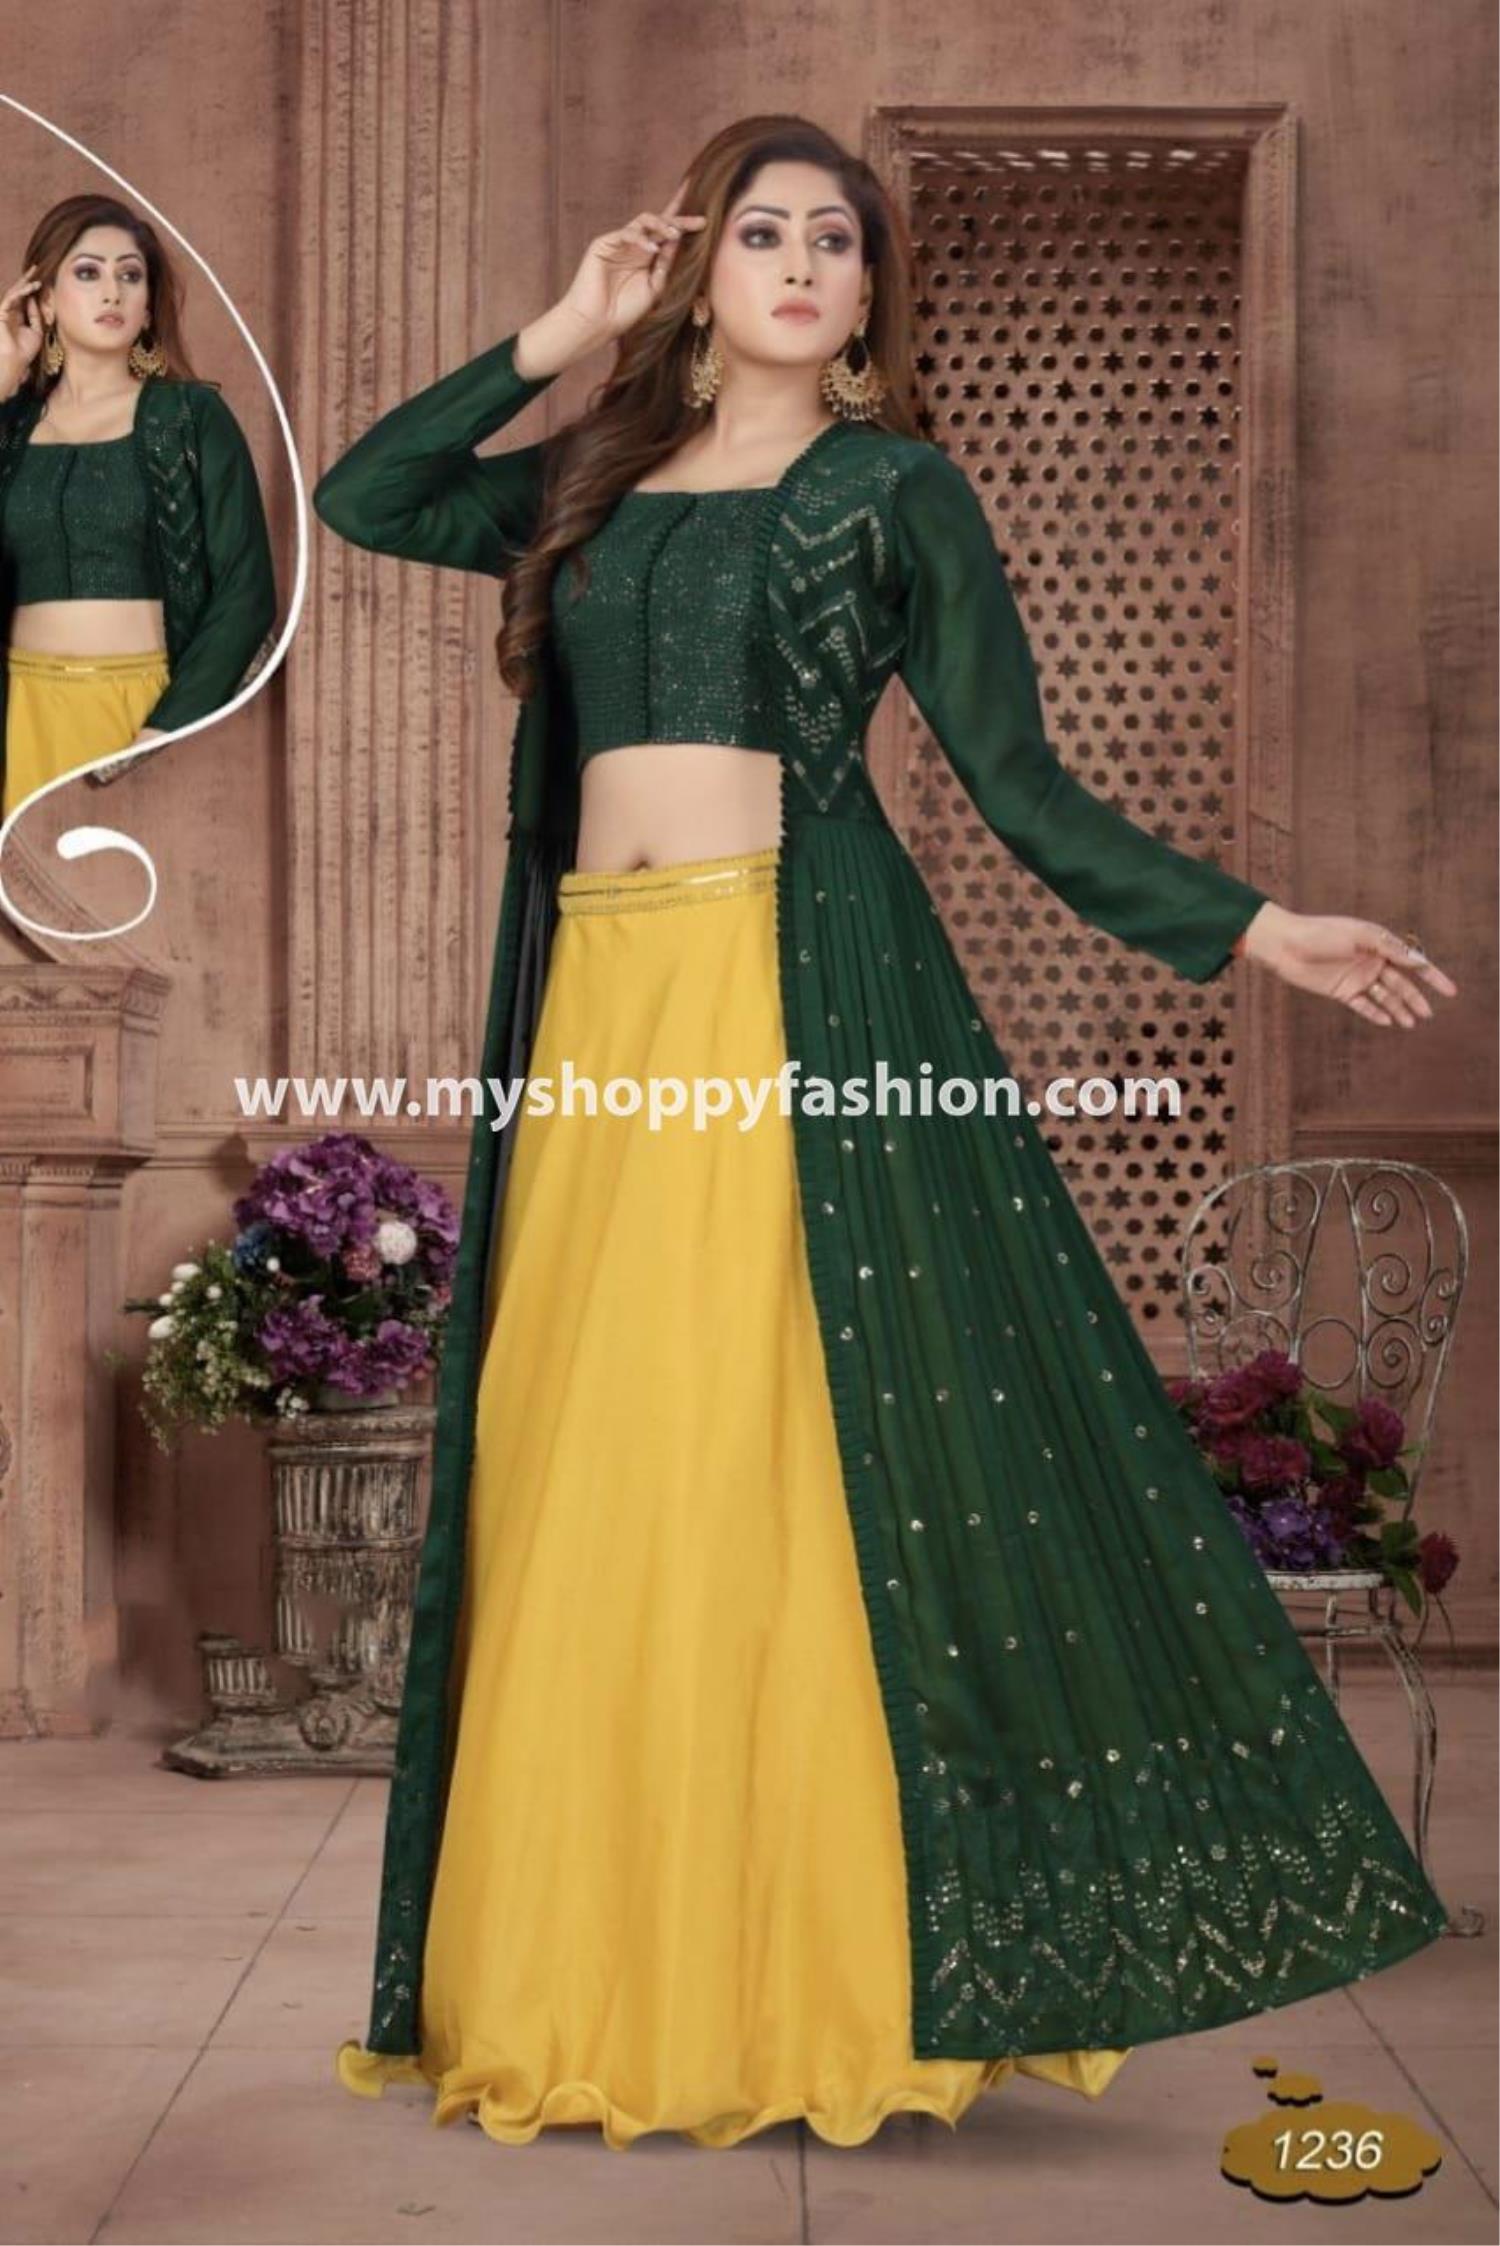 Buy New south Indian traditional pattu pavadai Lehenga choli for girls dress  Online In India At Discounted Prices